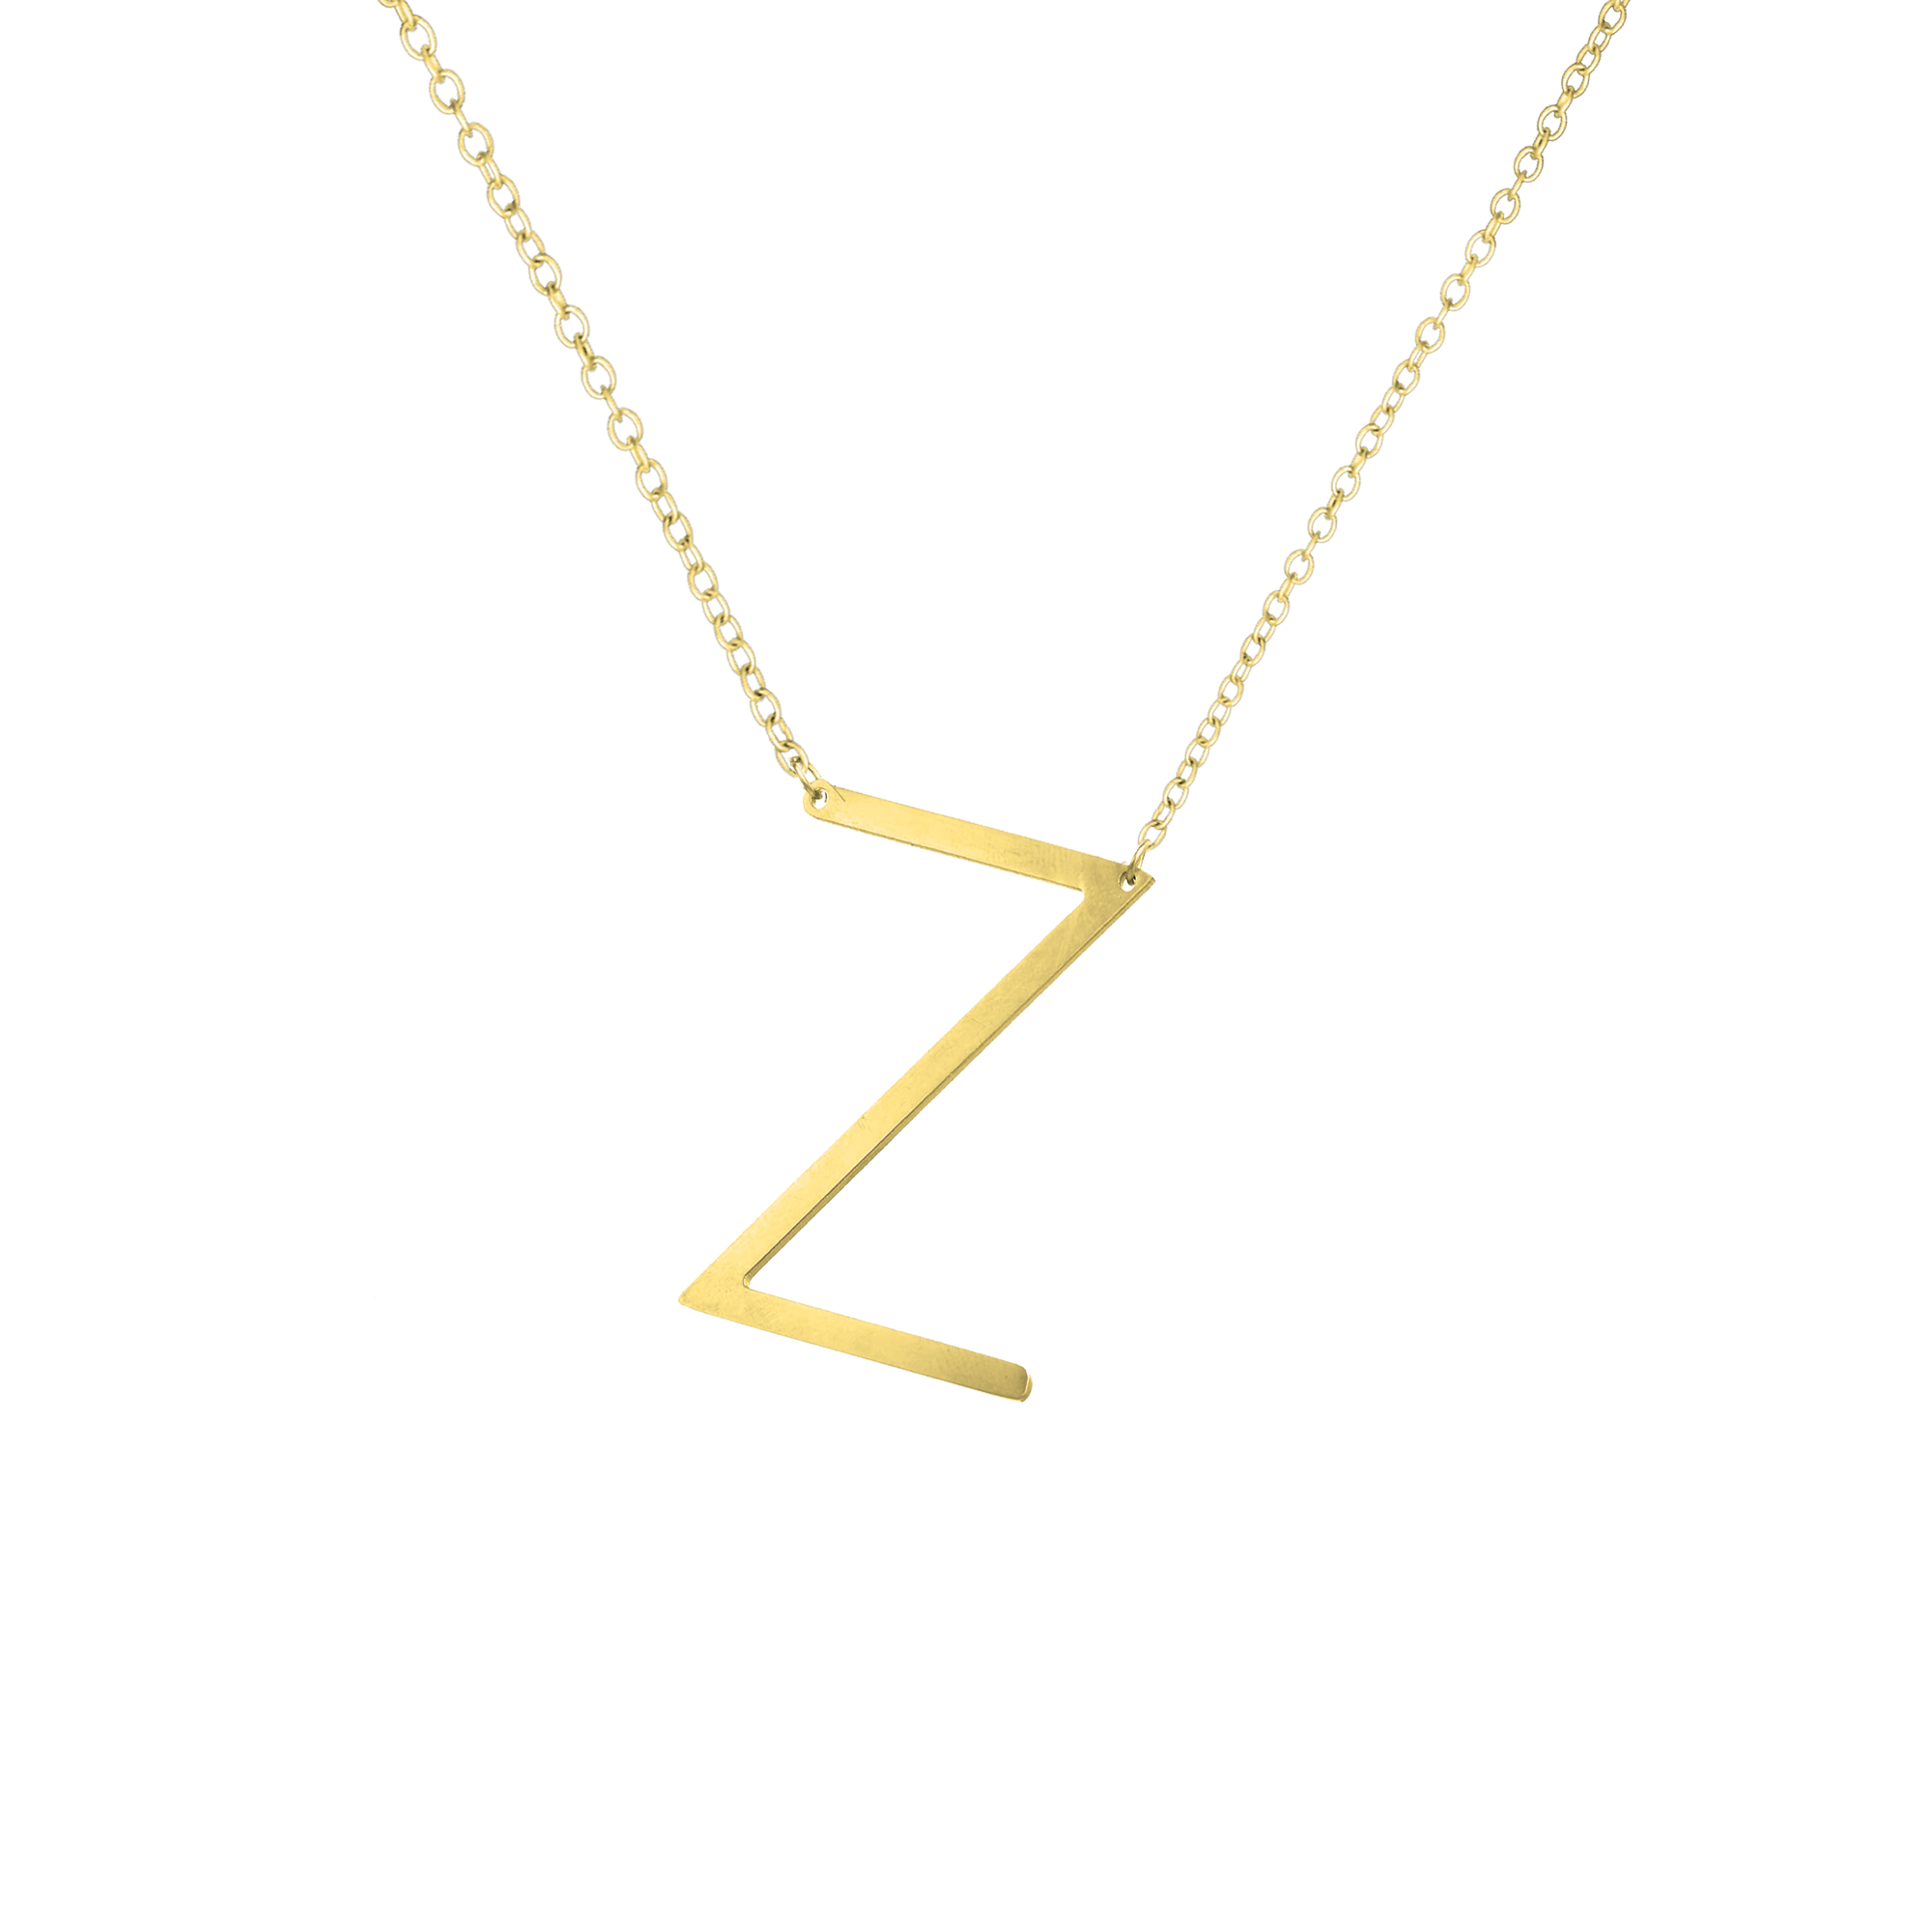 Amazon.com: Letter Name Necklace, Spaced Letter Necklace, Personalized Name  Necklace, Name Necklace, Initial Name Necklace, Multiple Letter Necklace :  Handmade Products